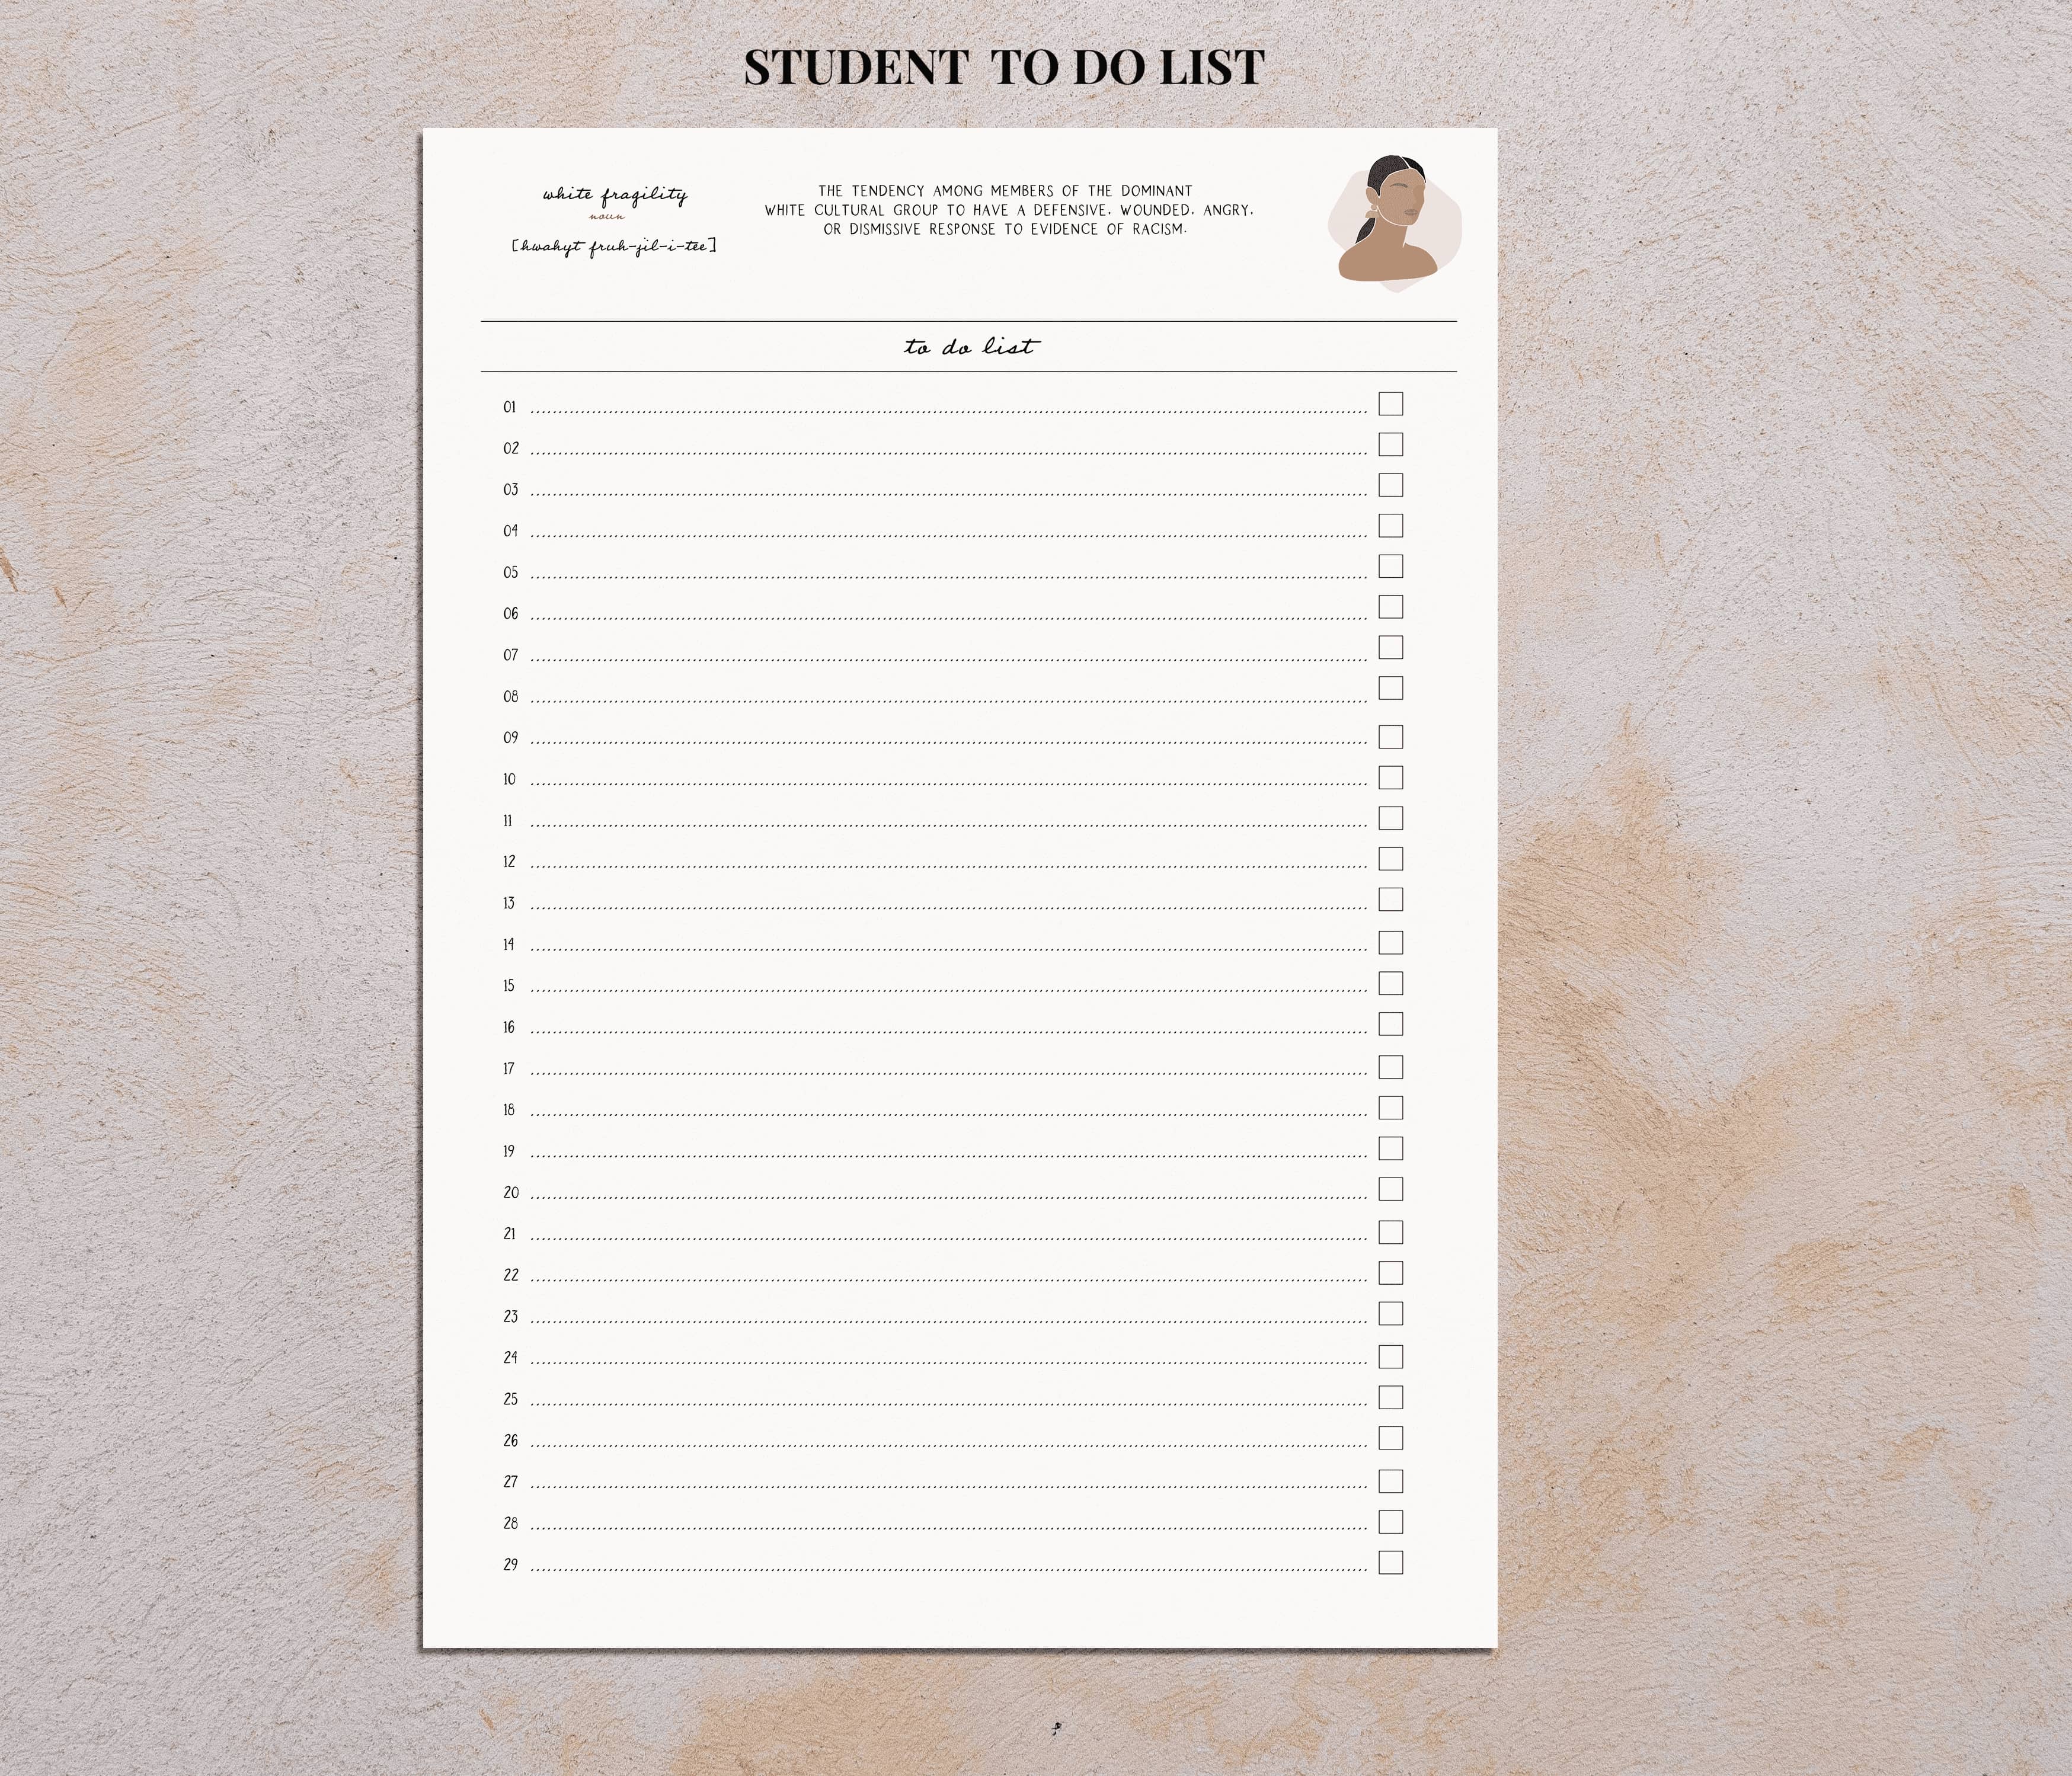 Student | To do list